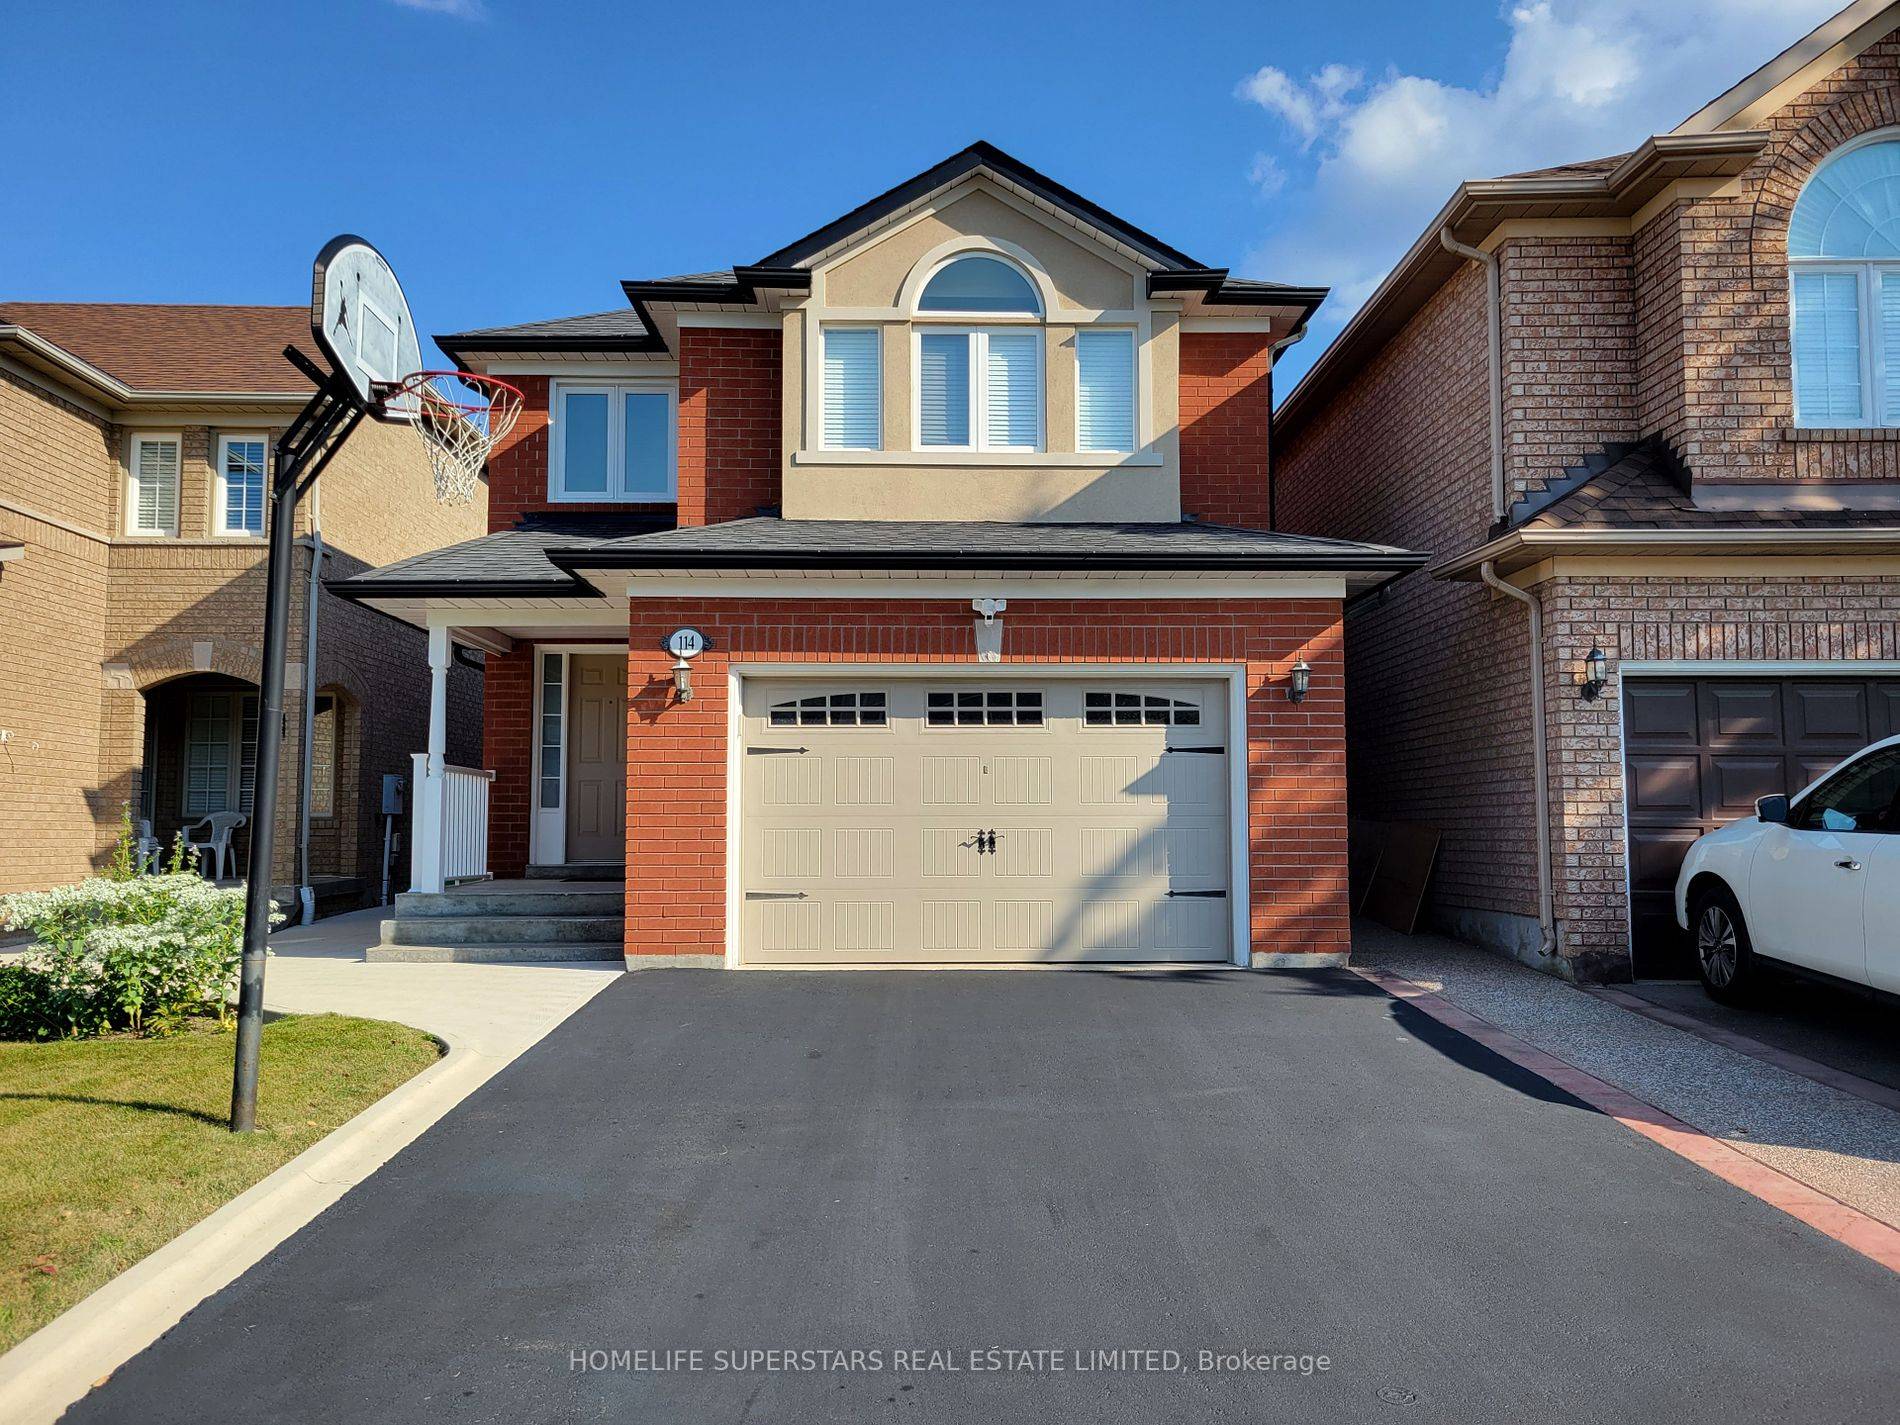 Welcome To This Bright And Beautiful 4 1 Bedroom House, Appealing Entry Leads To A Beautiful Laid Out Main W Spacious Living Dining Rm Relaxing Family Room, New Kitchen With ...